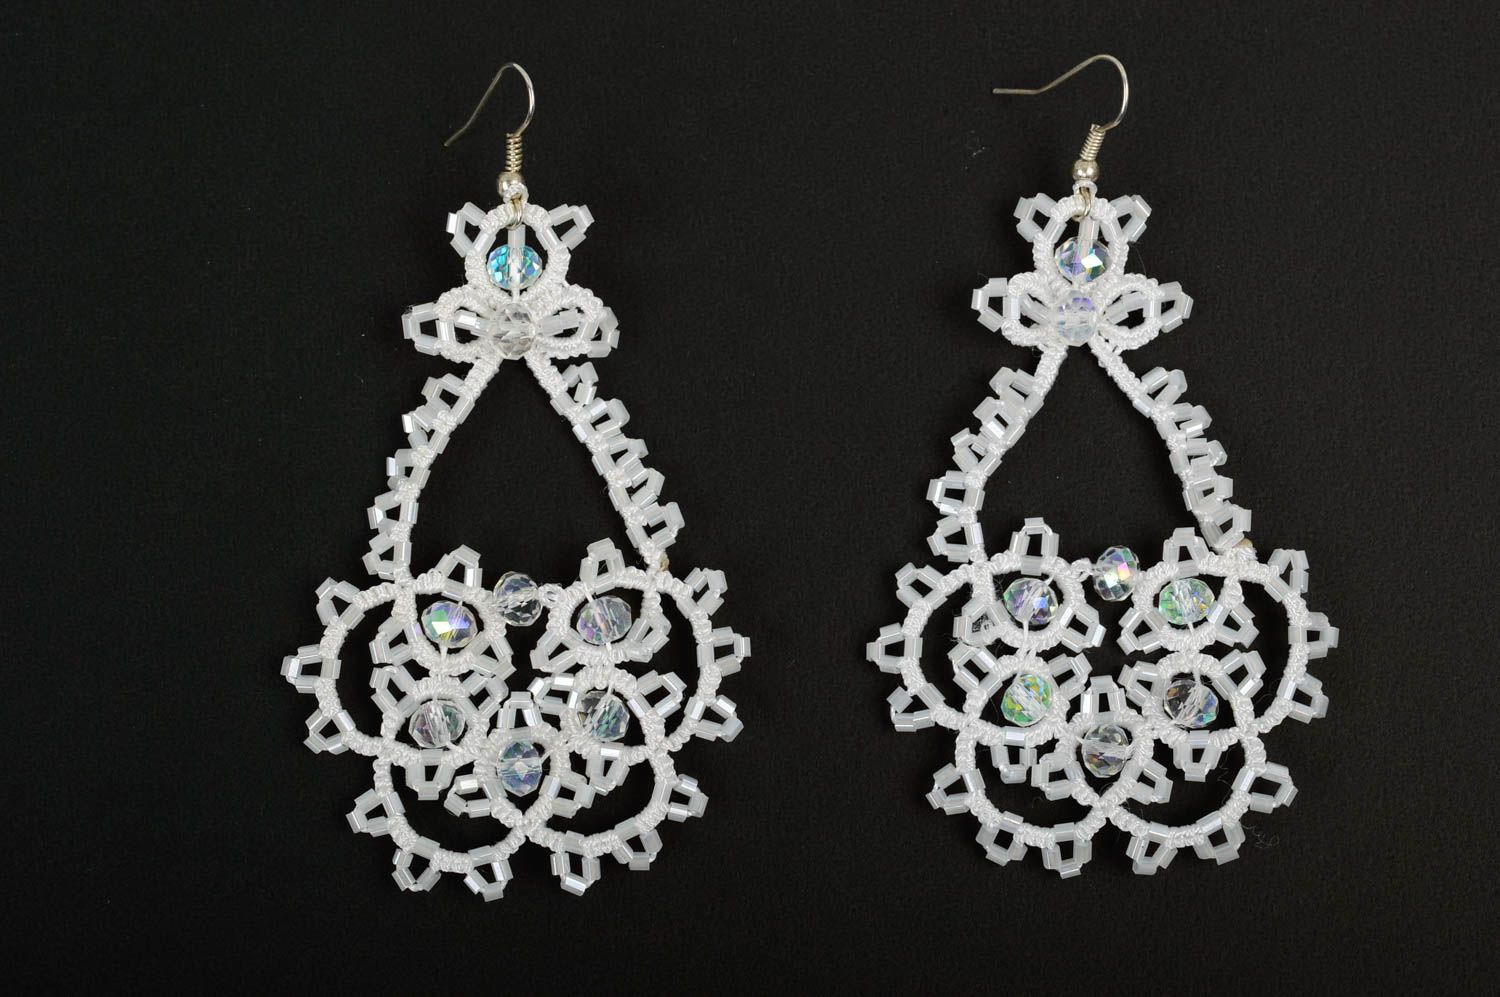 Handmade woven lace earrings textile jewelry designs accessories for girls photo 1